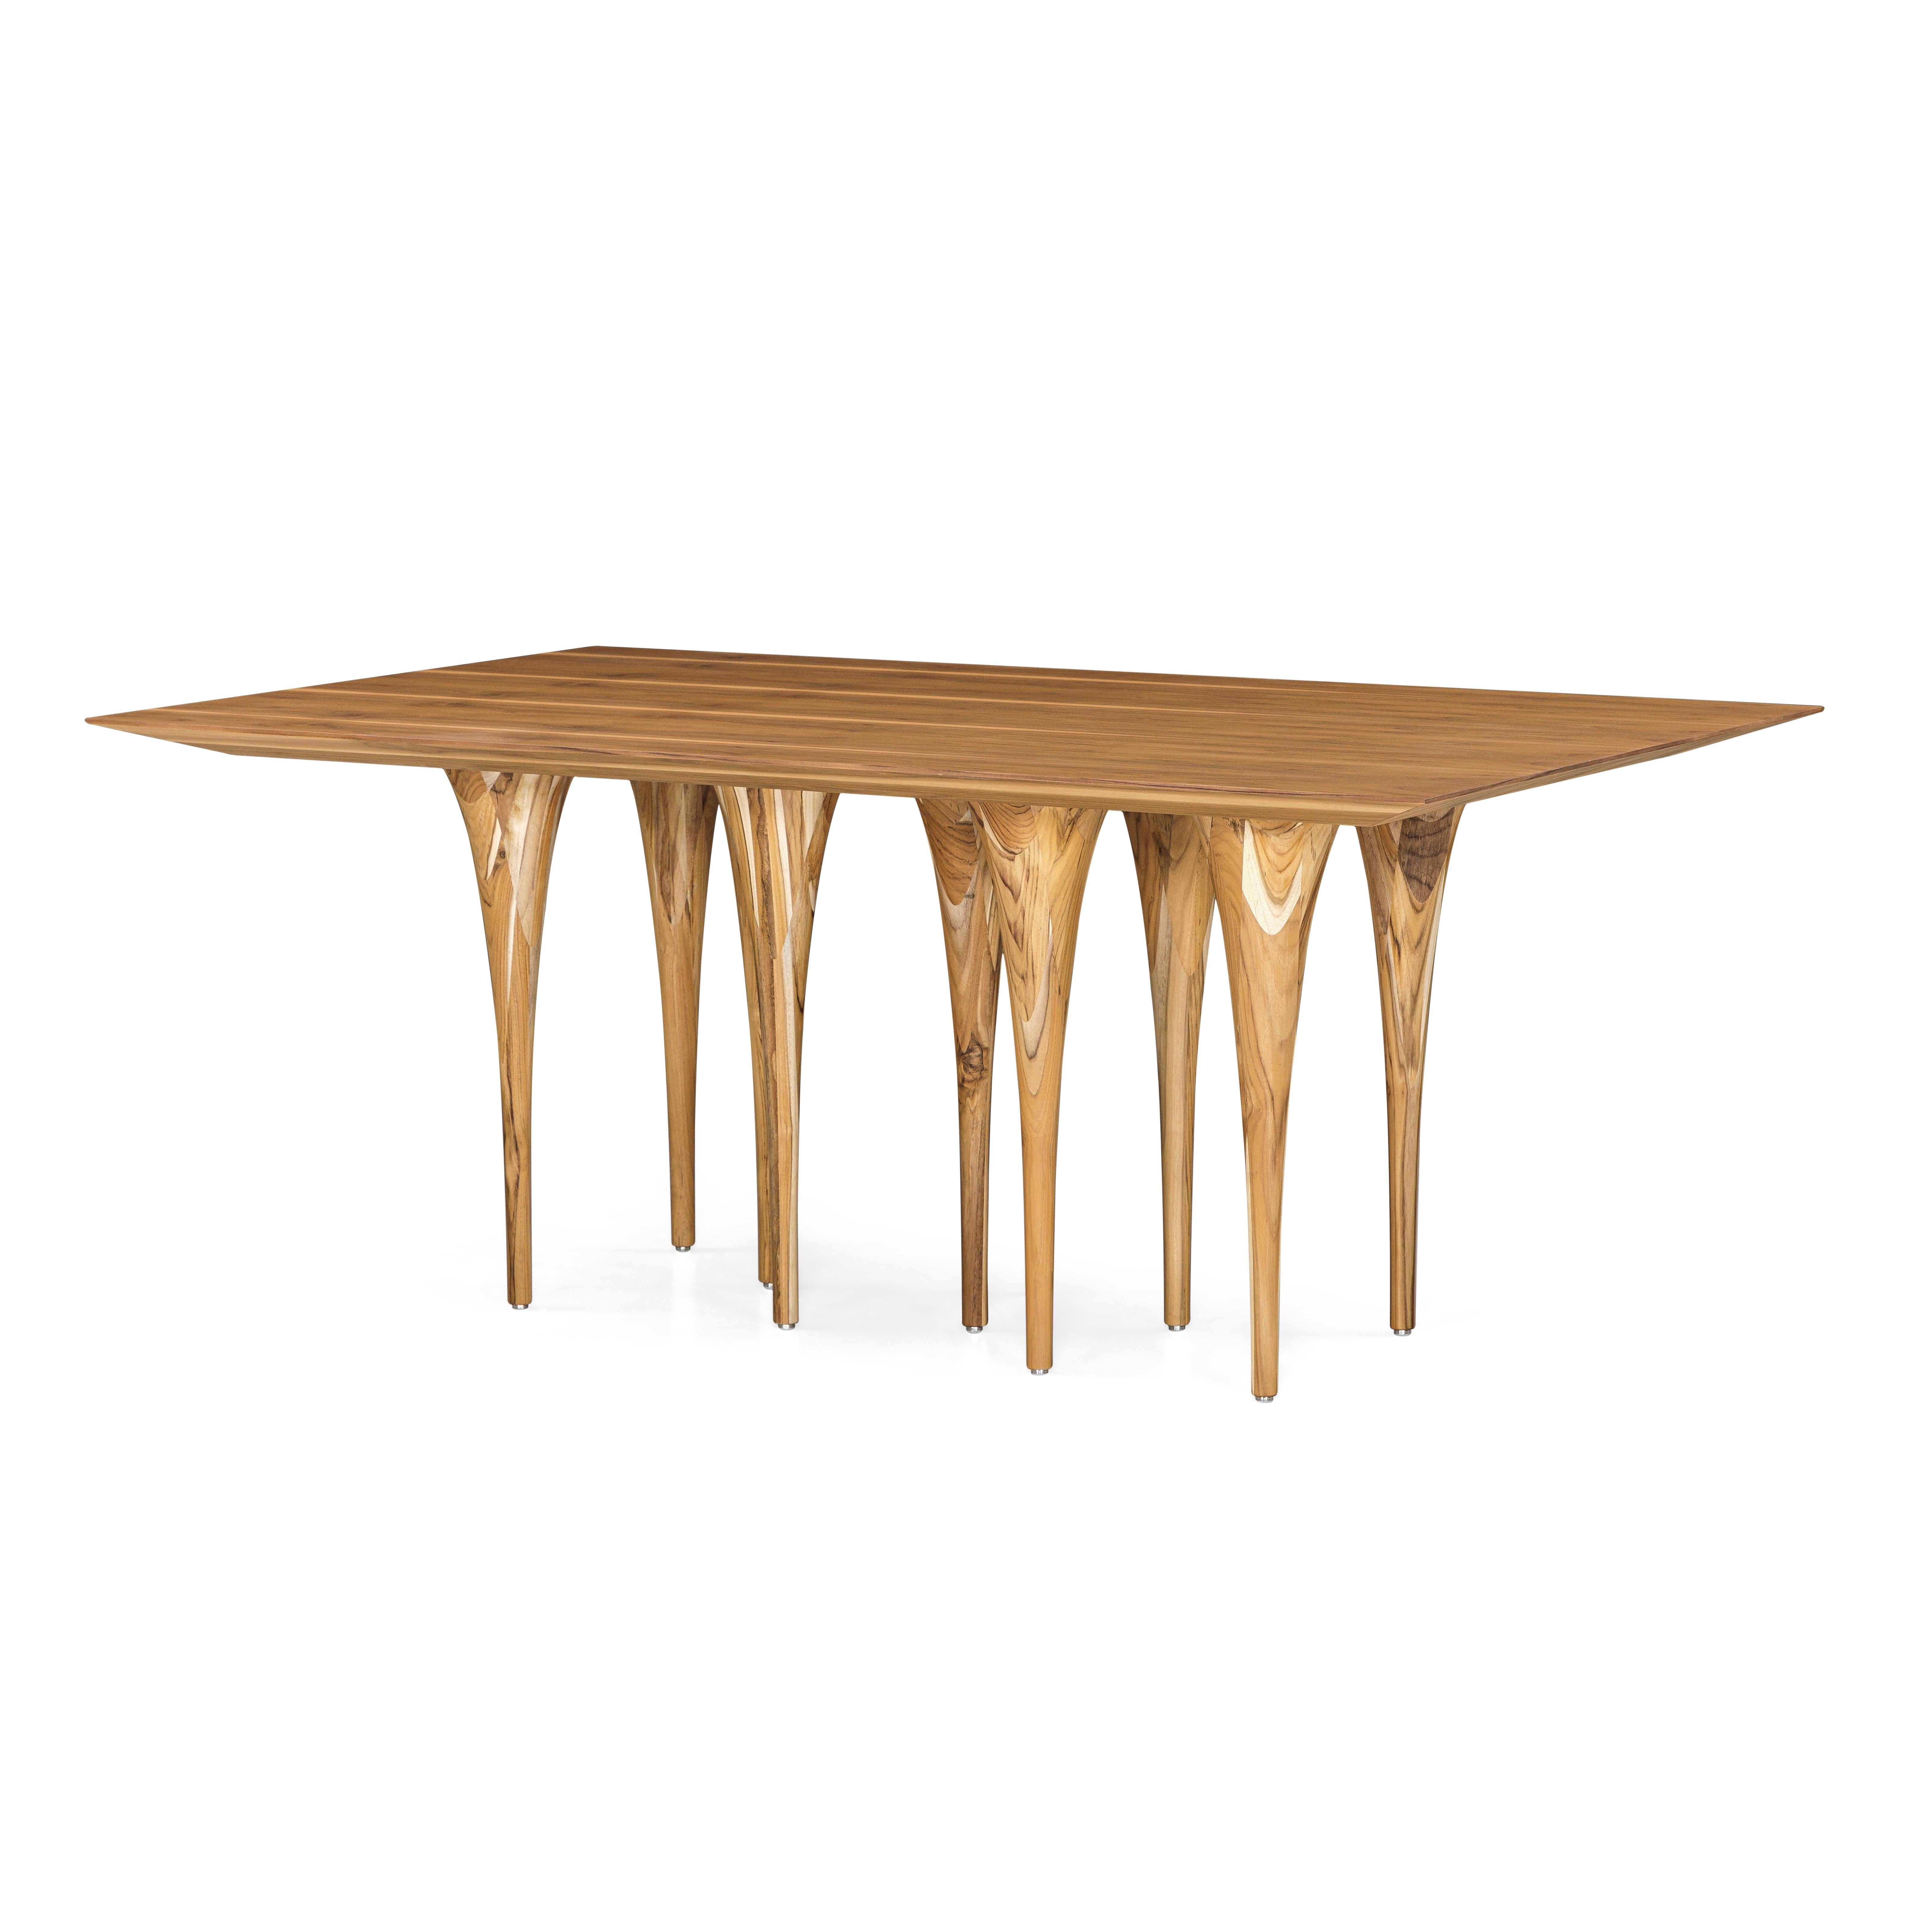 The Uultis team has created this rectangular Pin table in a teak wood finish with ten legs causing a surprising impact at first sight. It has a very singular and original structure resembling the corridors of Gothic castles, but at the same time, it